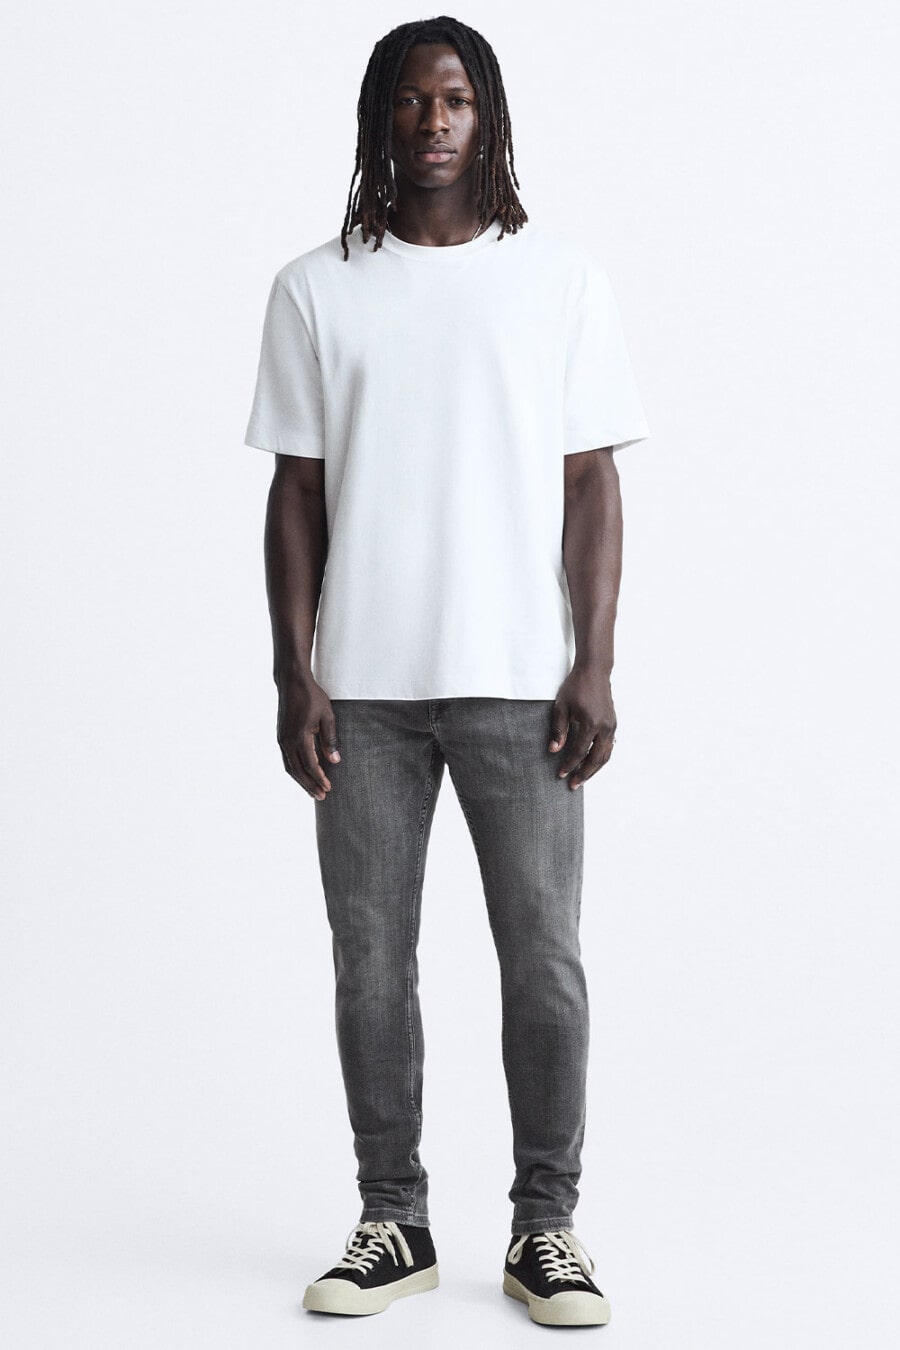 Men's washed grey jeans, white T-shirt and black canvas high-top sneakers outfit